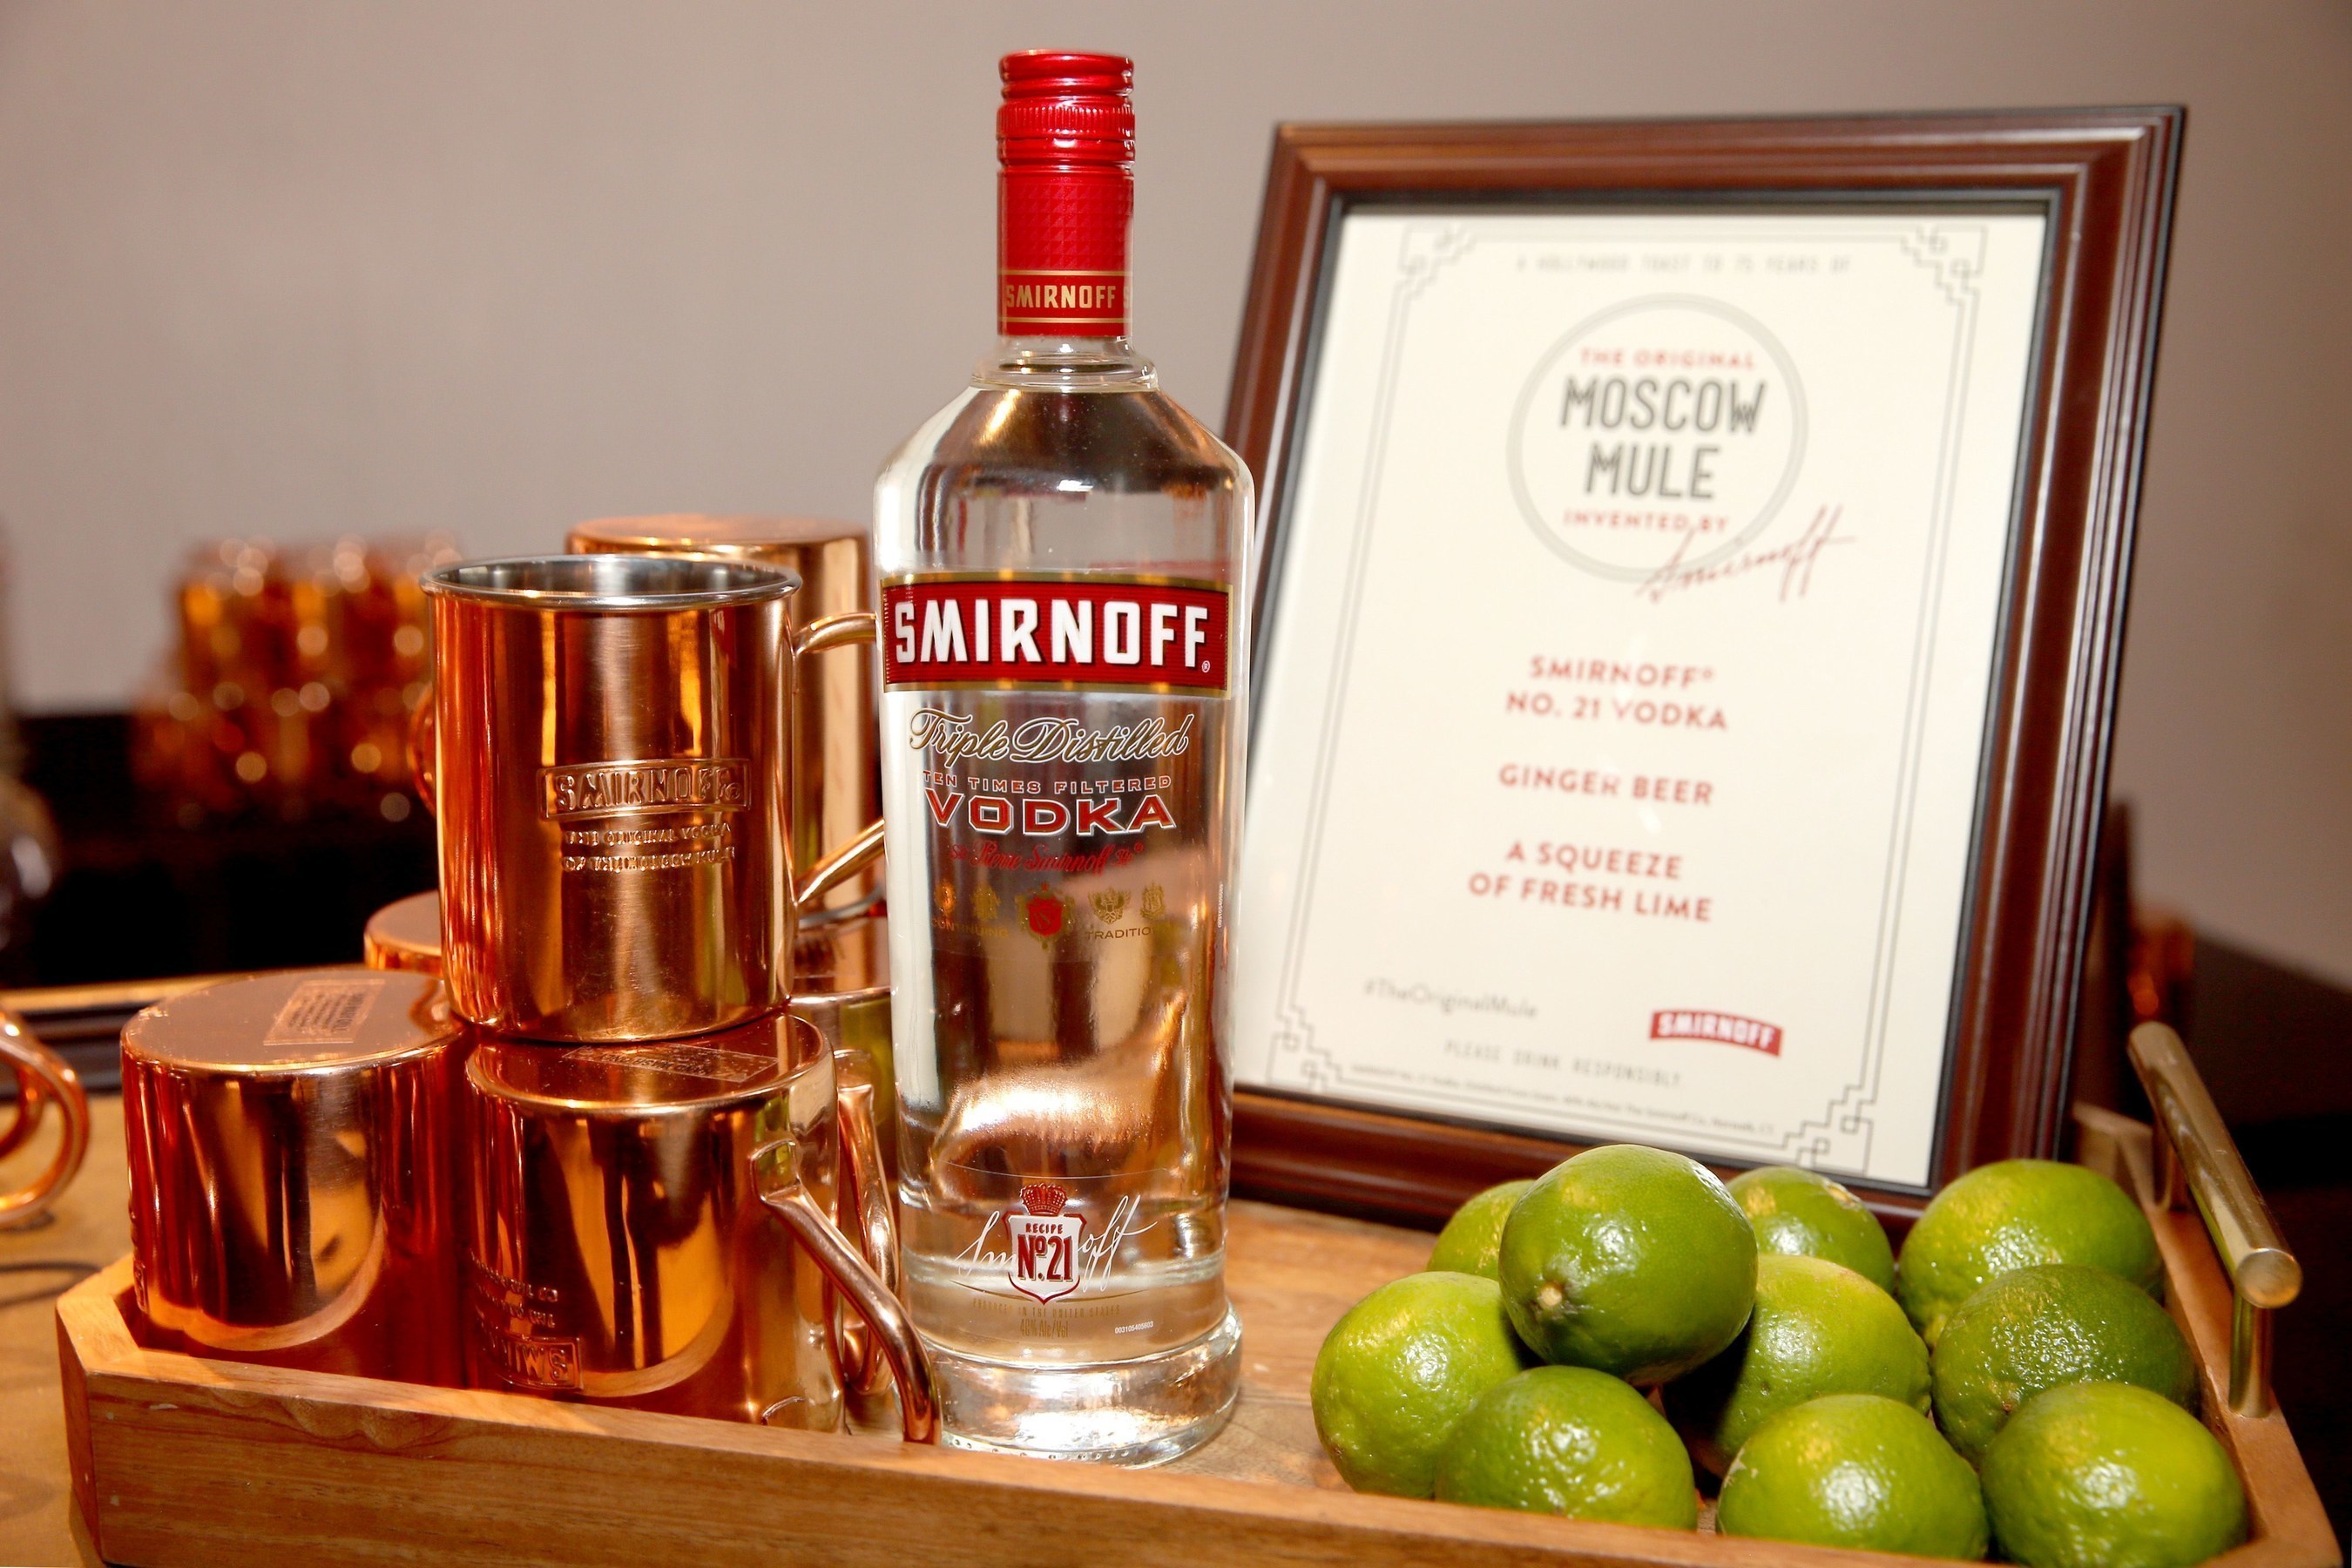 SMIRNOFF vodka, the brand that invented the Moscow Mule in 1941, celebrates the classic cocktail's 75th anniversary at an event in Los Angeles, CA on October 19, 2016 (photo by Jesse Grant)